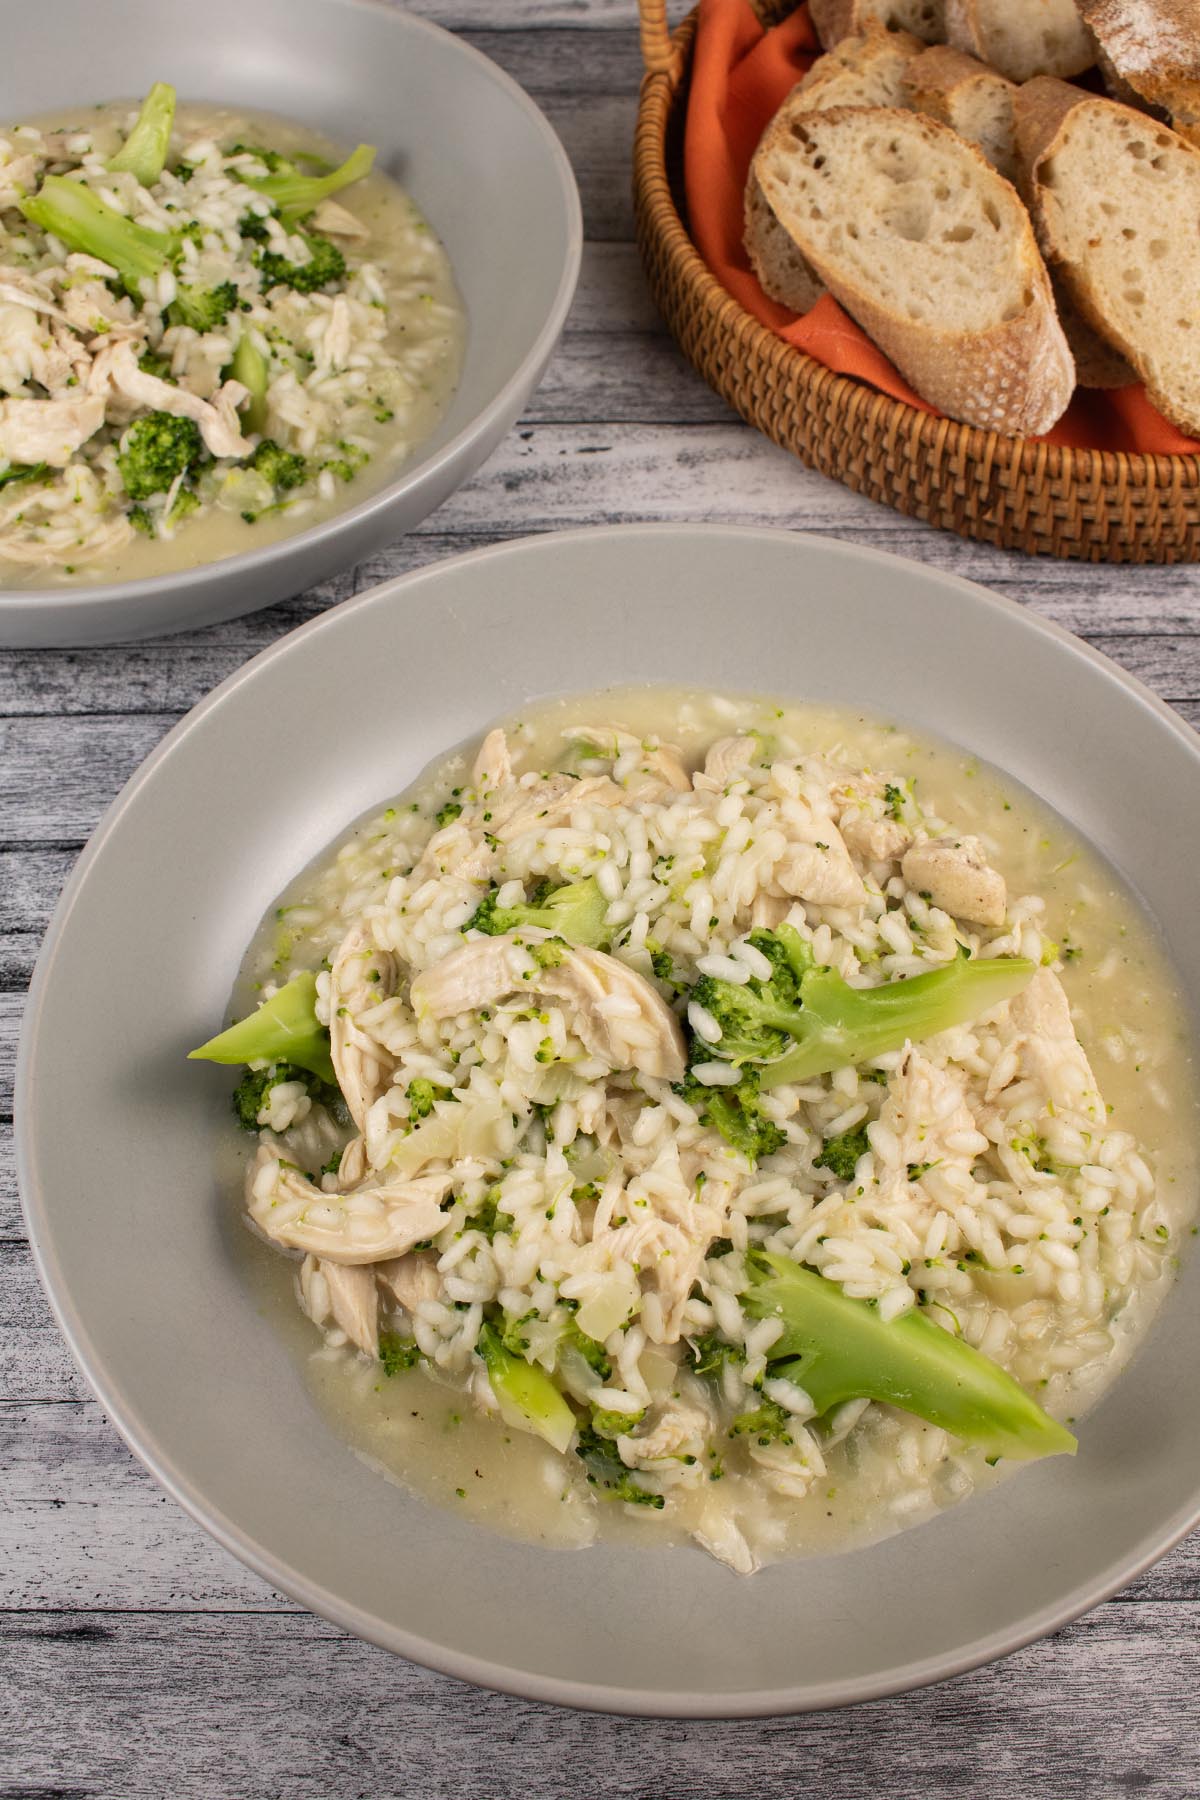 Chicken and broccoli risotto in a grey bowl and sliced baguette